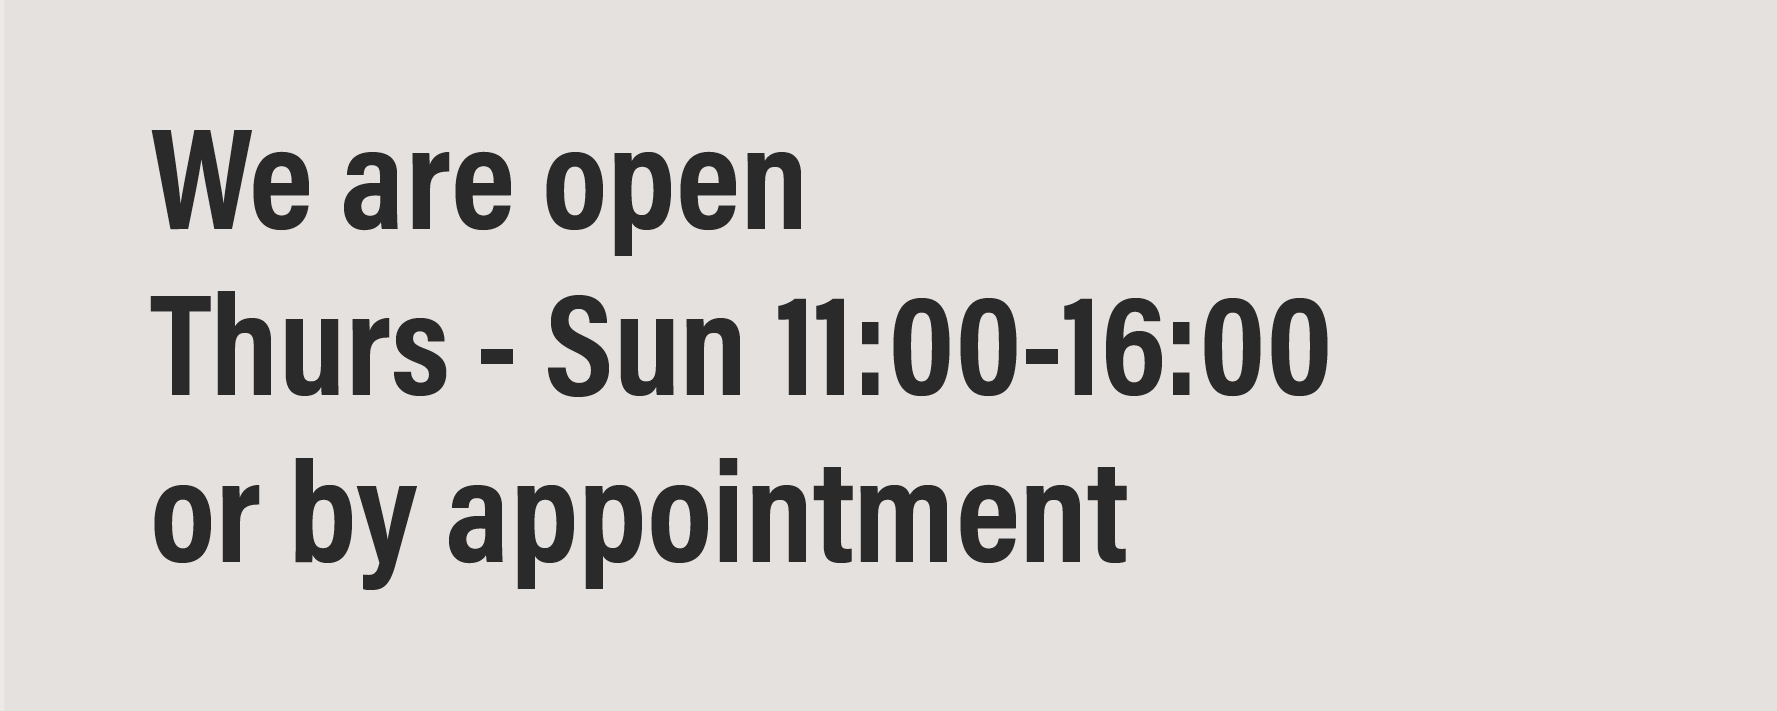 We are open Thursday to Sunday 11:00 to 16:00 or by appointment